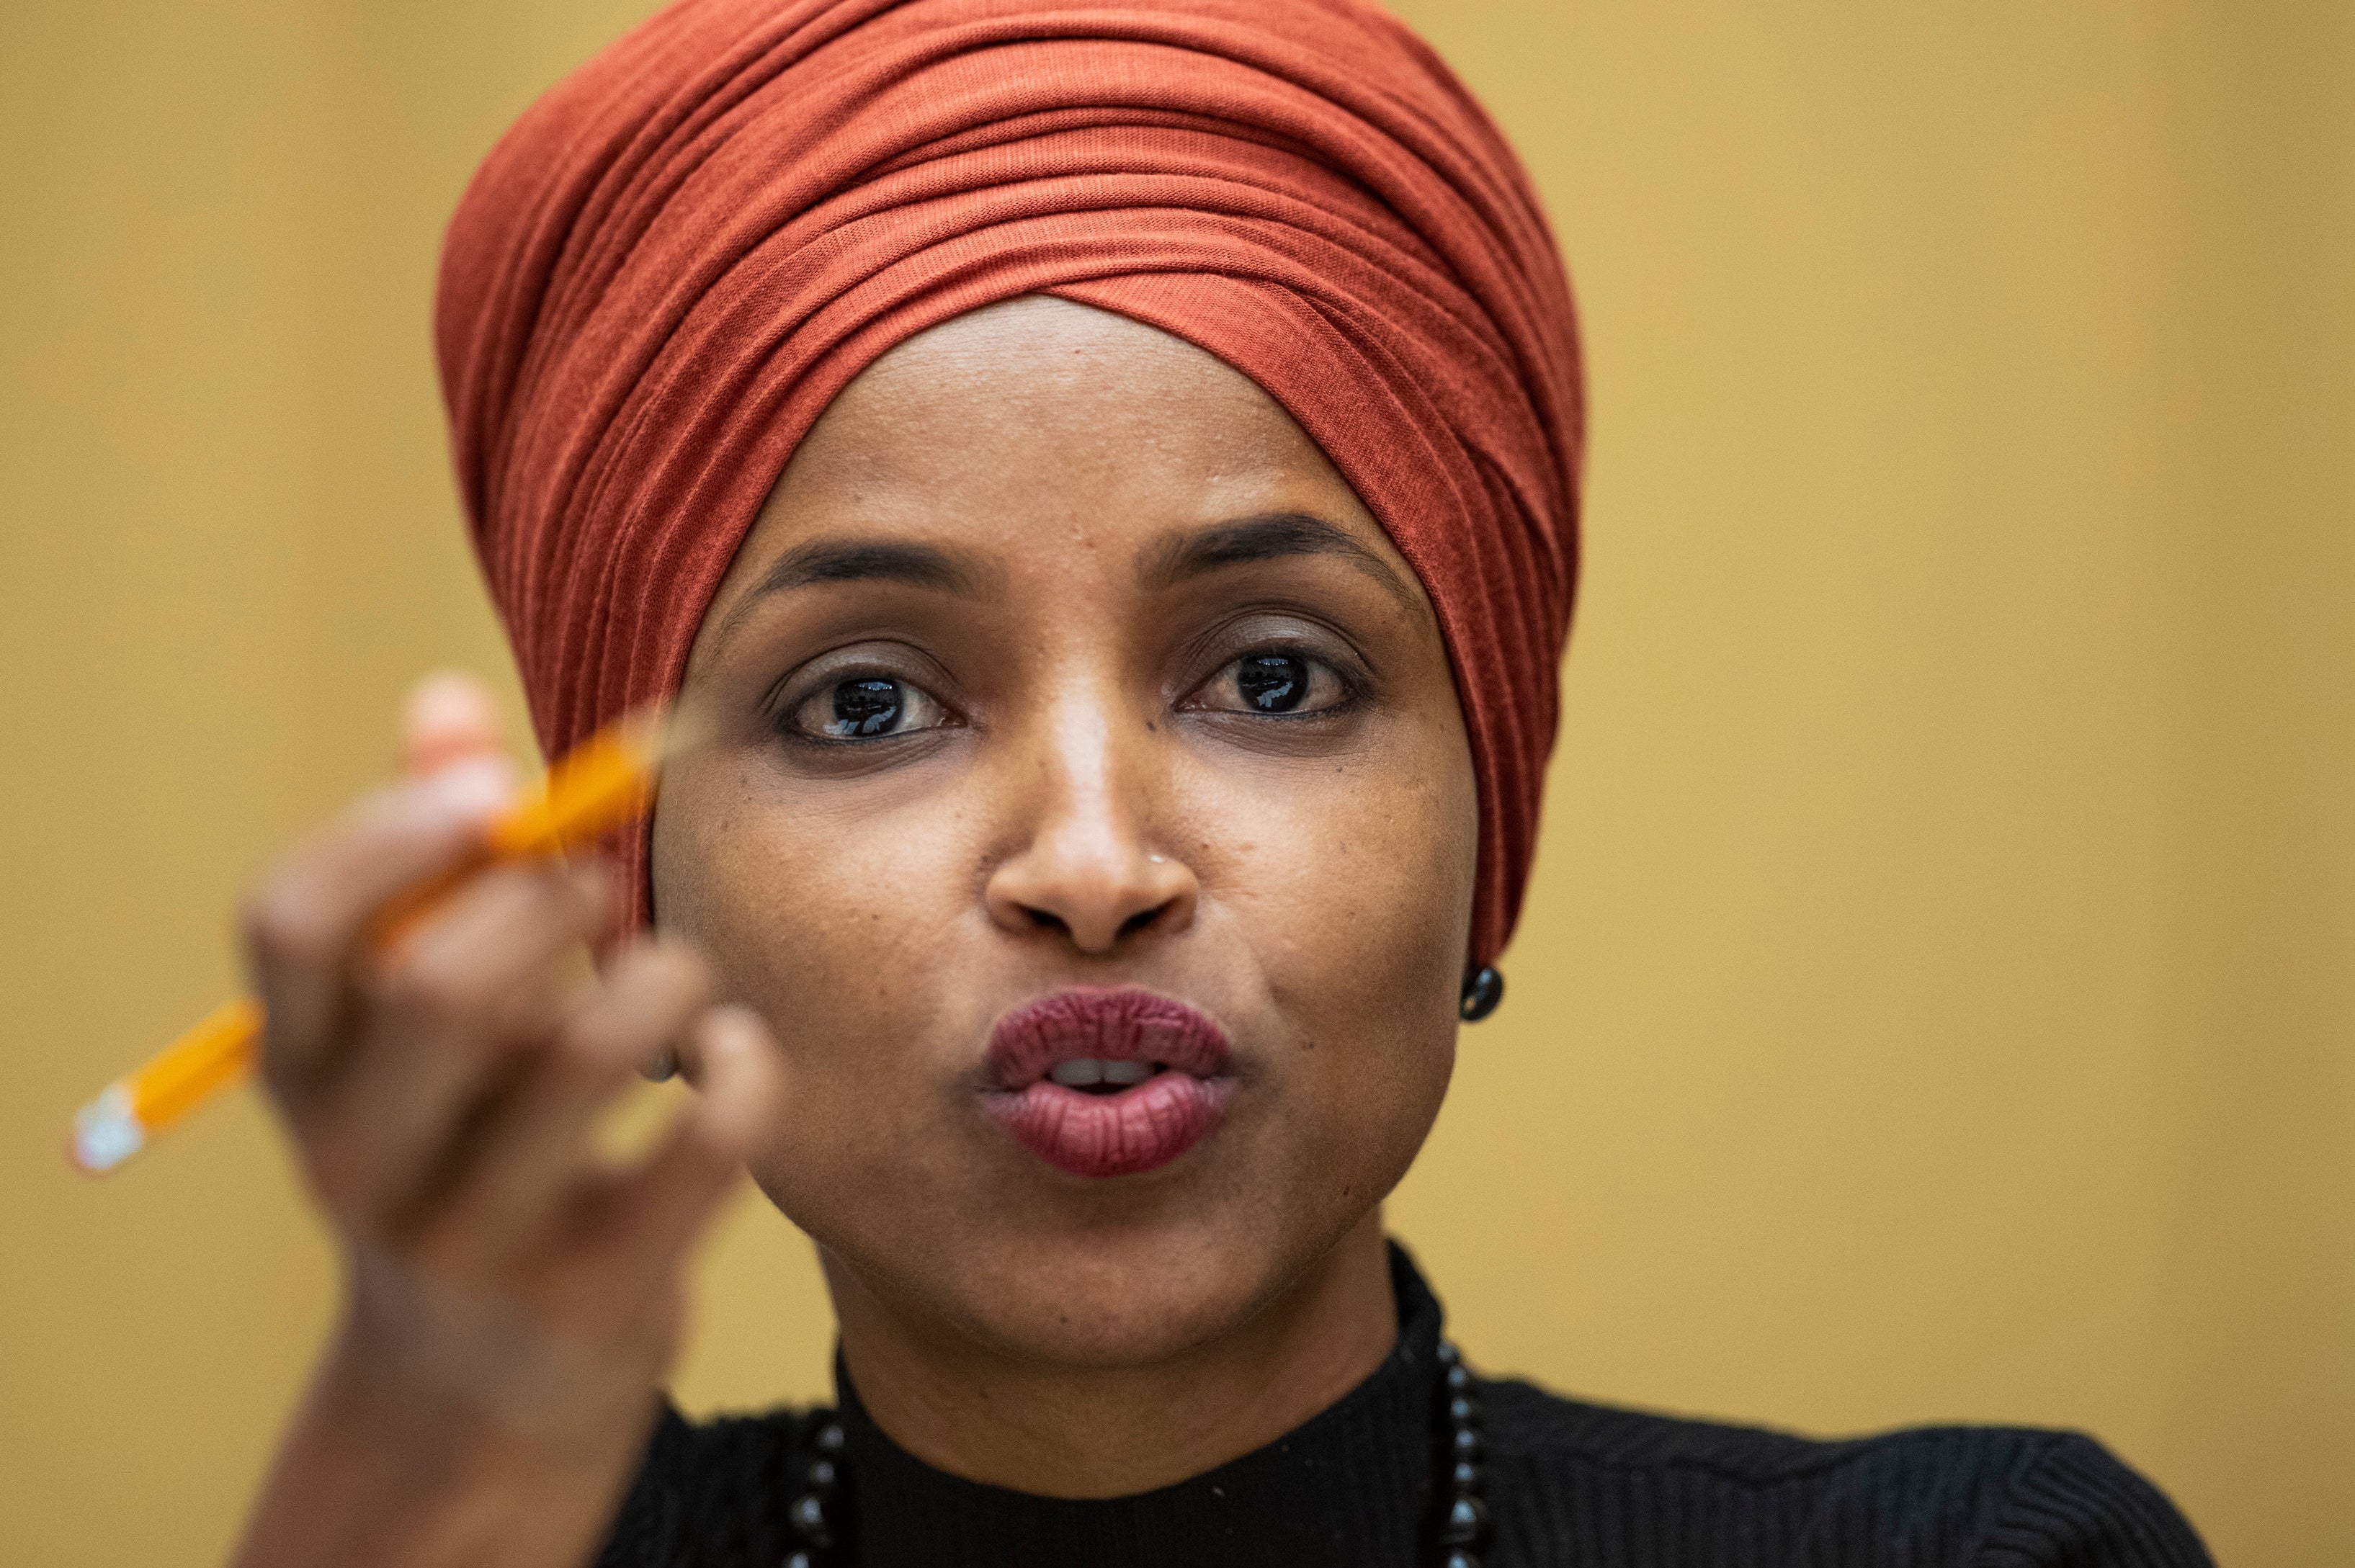 Ilhan Omar has faced calls for an ethics investigation